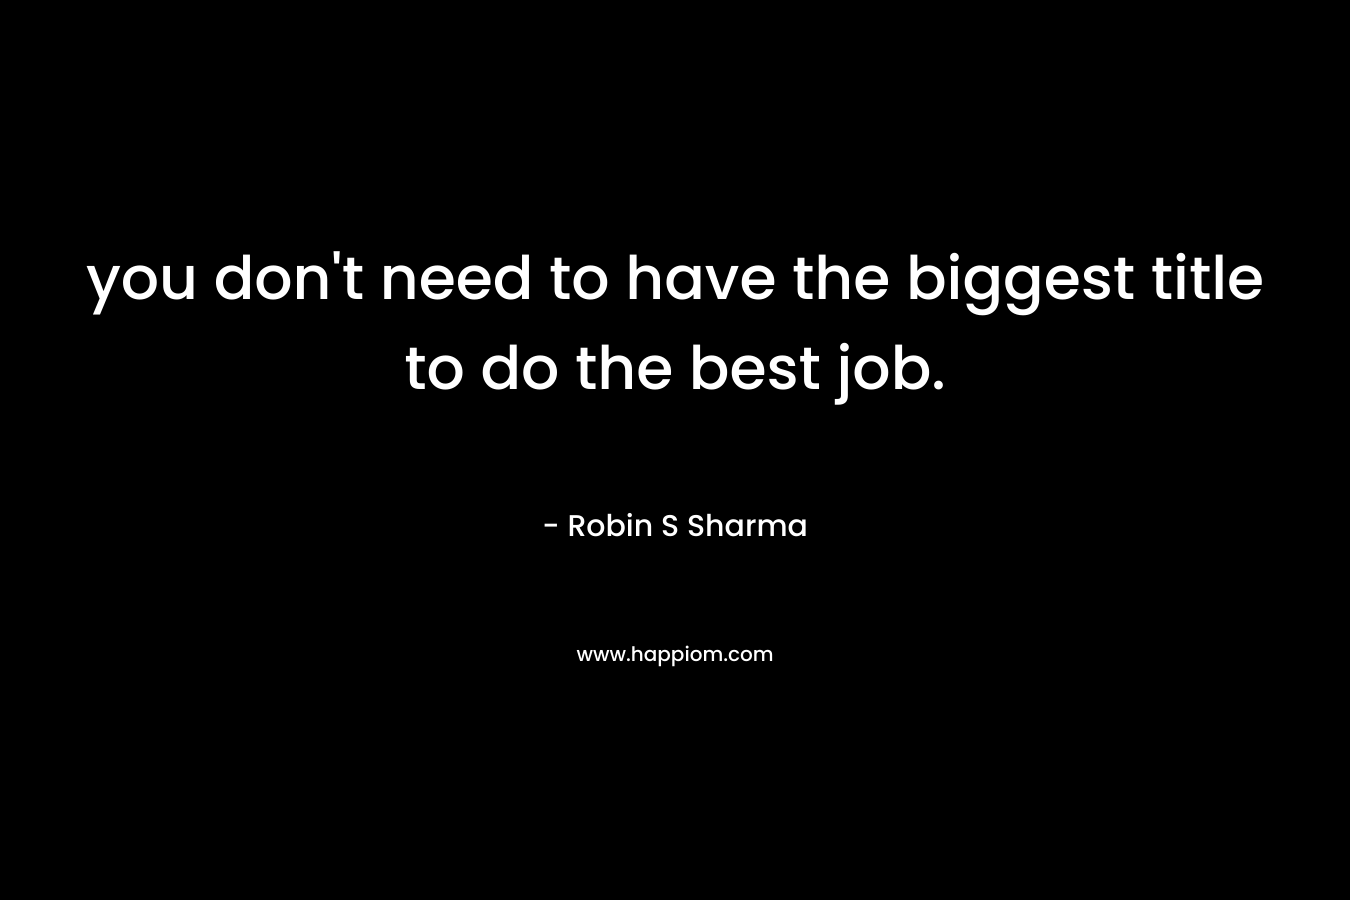 you don't need to have the biggest title to do the best job.